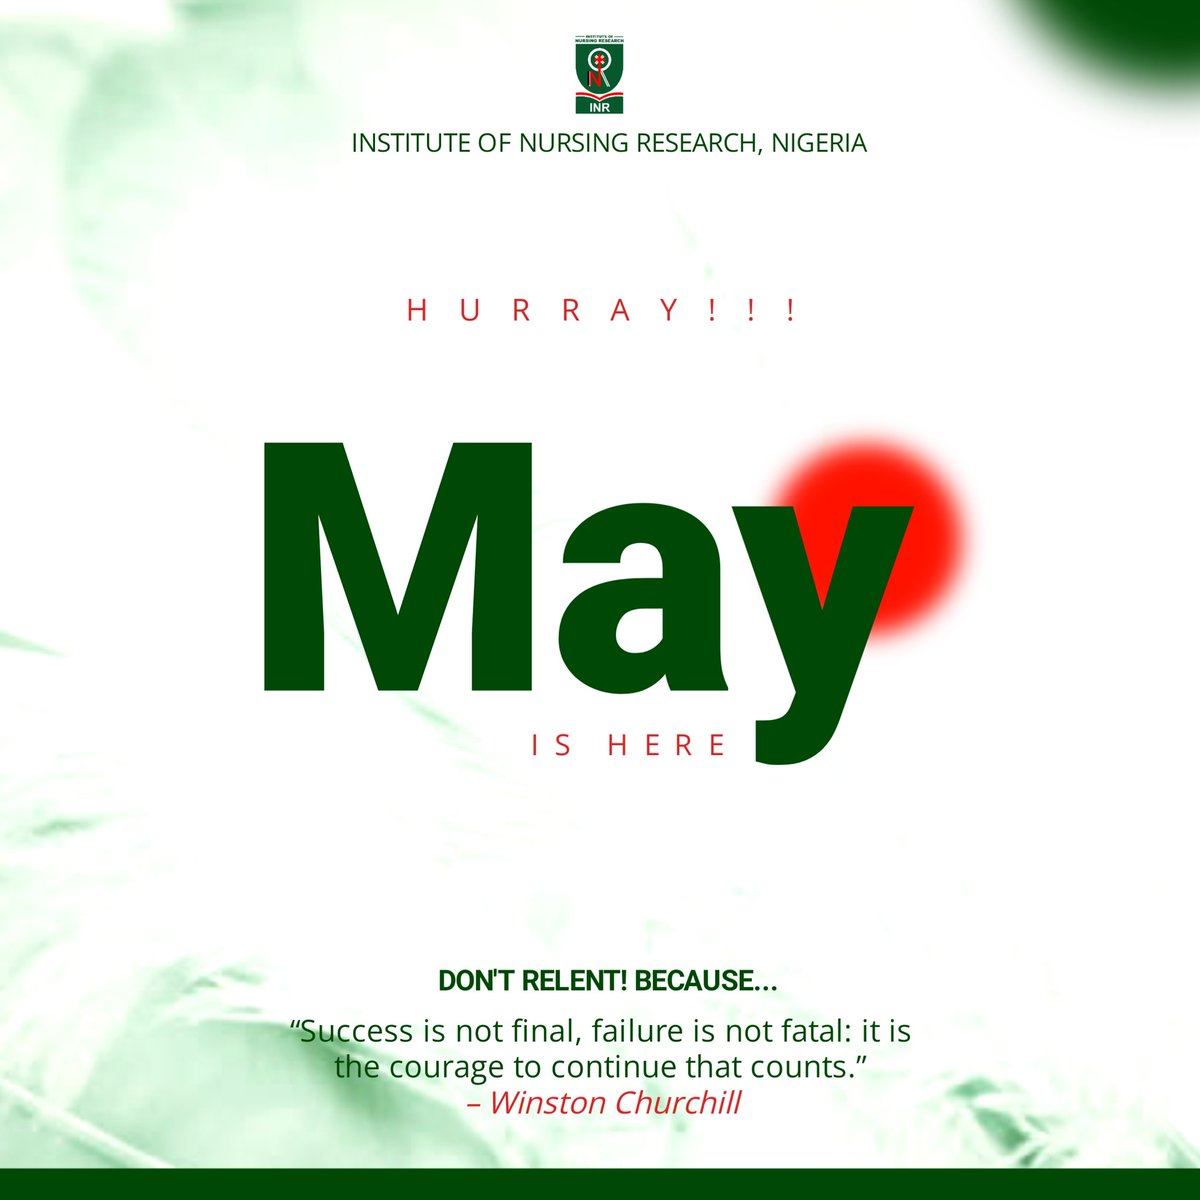 And it's MAY '24 Don't relent! Don't relax! Pick it up and forge ahead ©INR Nigeria